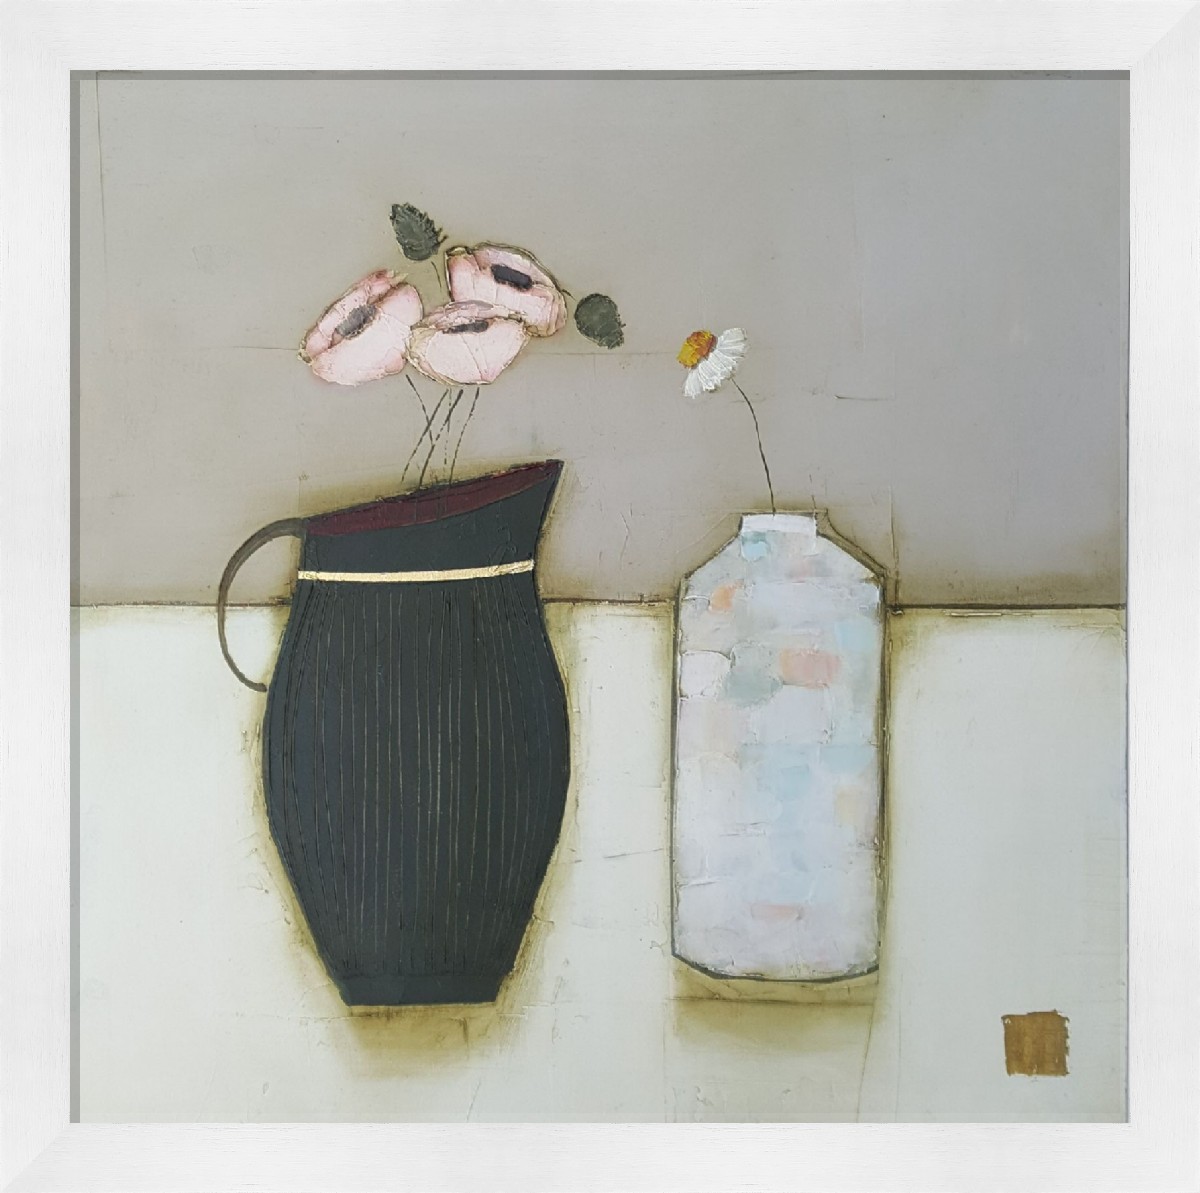 Black jug and white bottle by Eithne  Roberts